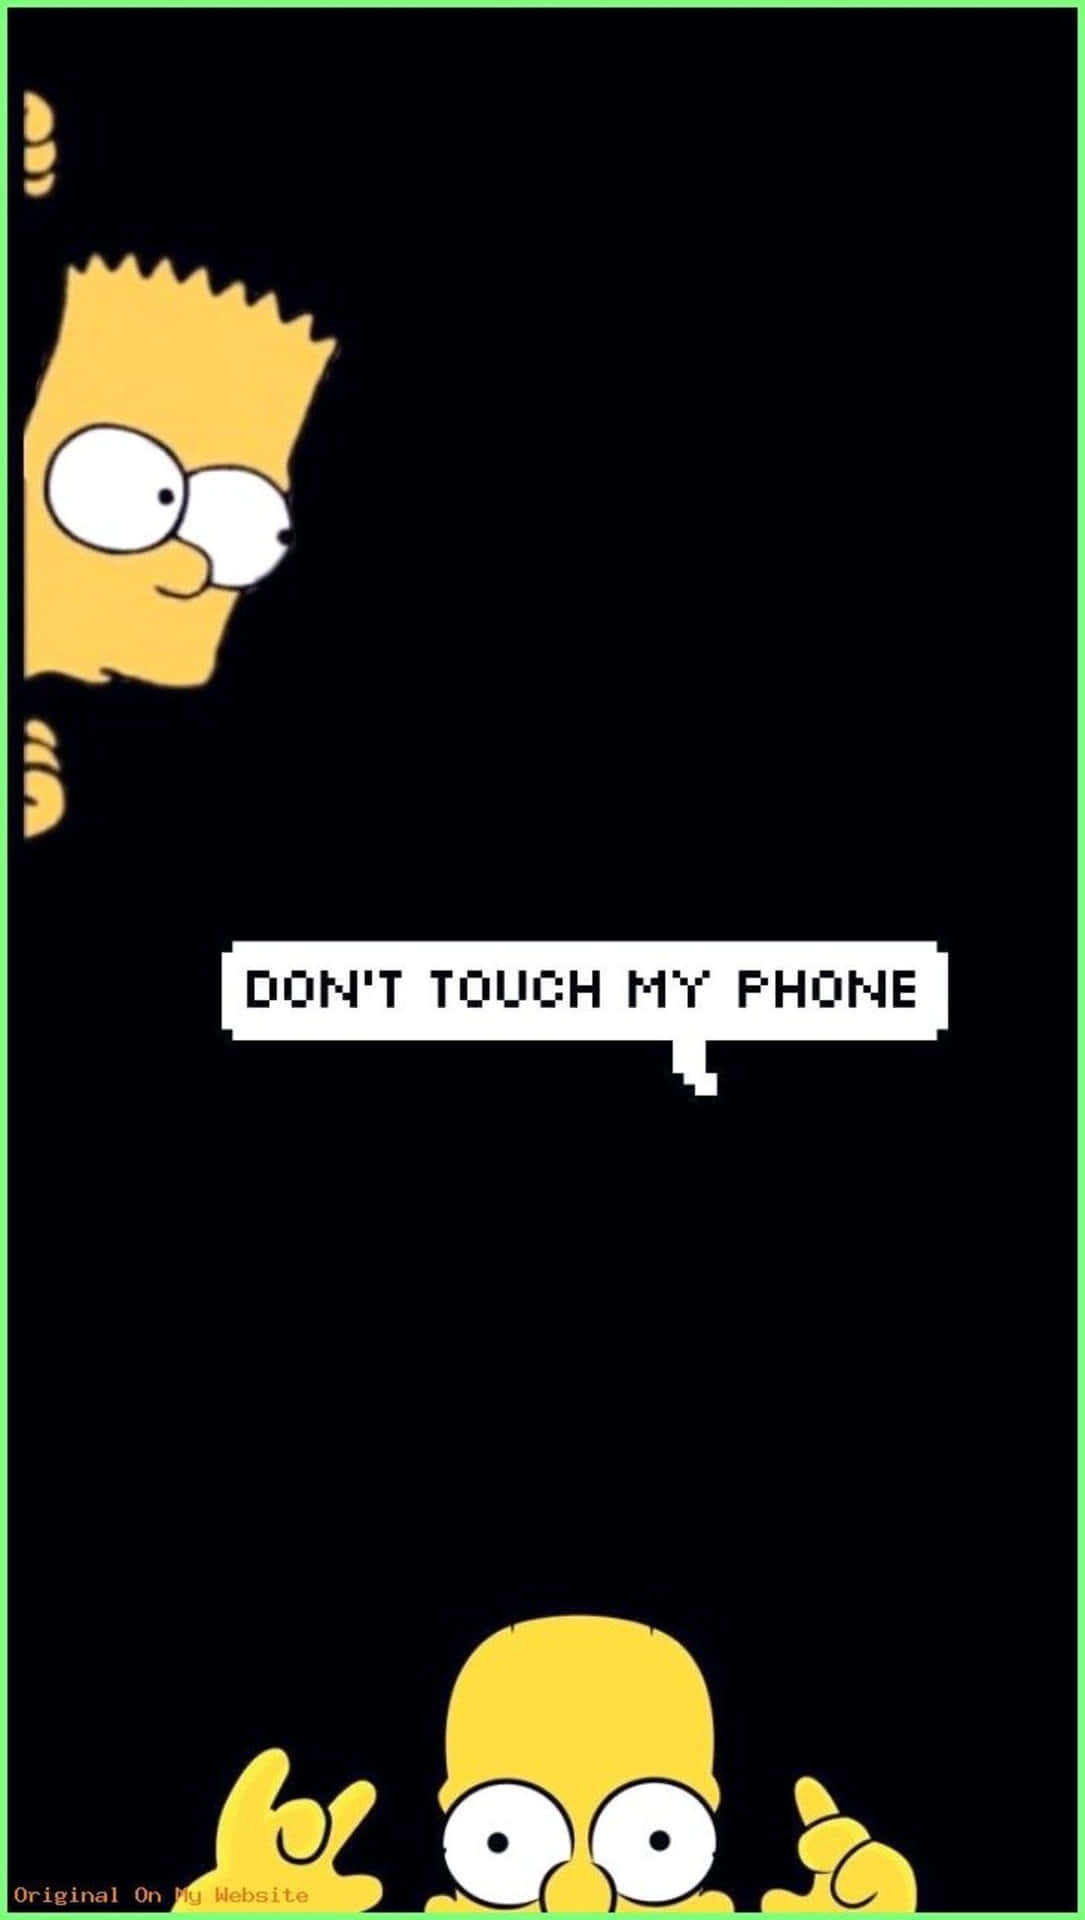 Don't touch my phone wallpaper - Bart Simpson